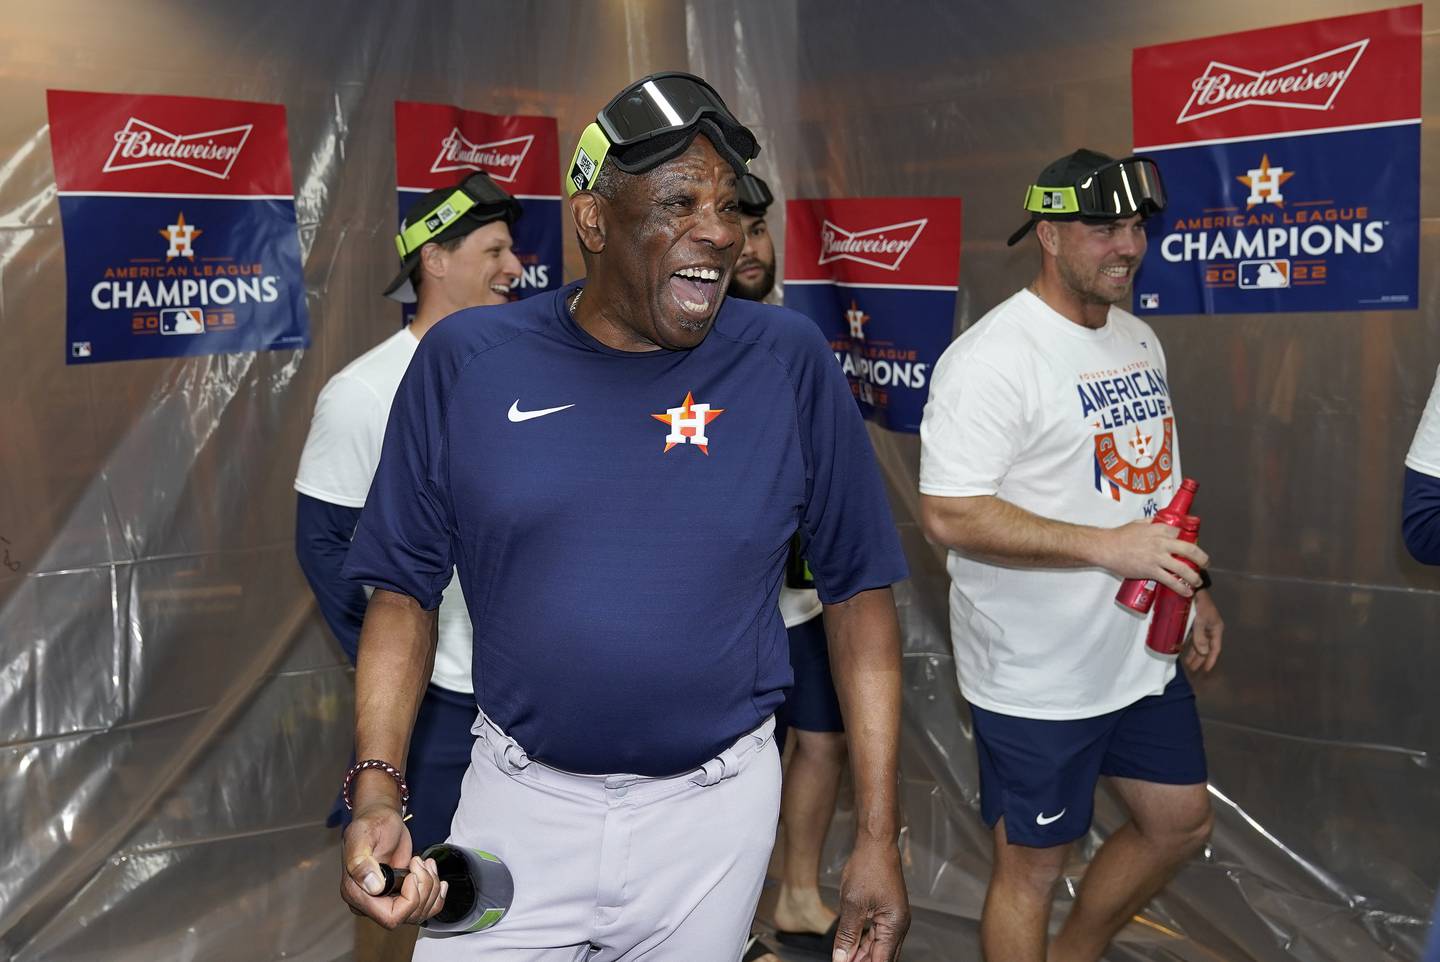 Astros manager Dusty Baker celebrates with his team in the locker room after defeating the Yankees in Game 4 to win the ALCS on Sunday, Oct. 23, 2022, in New York.